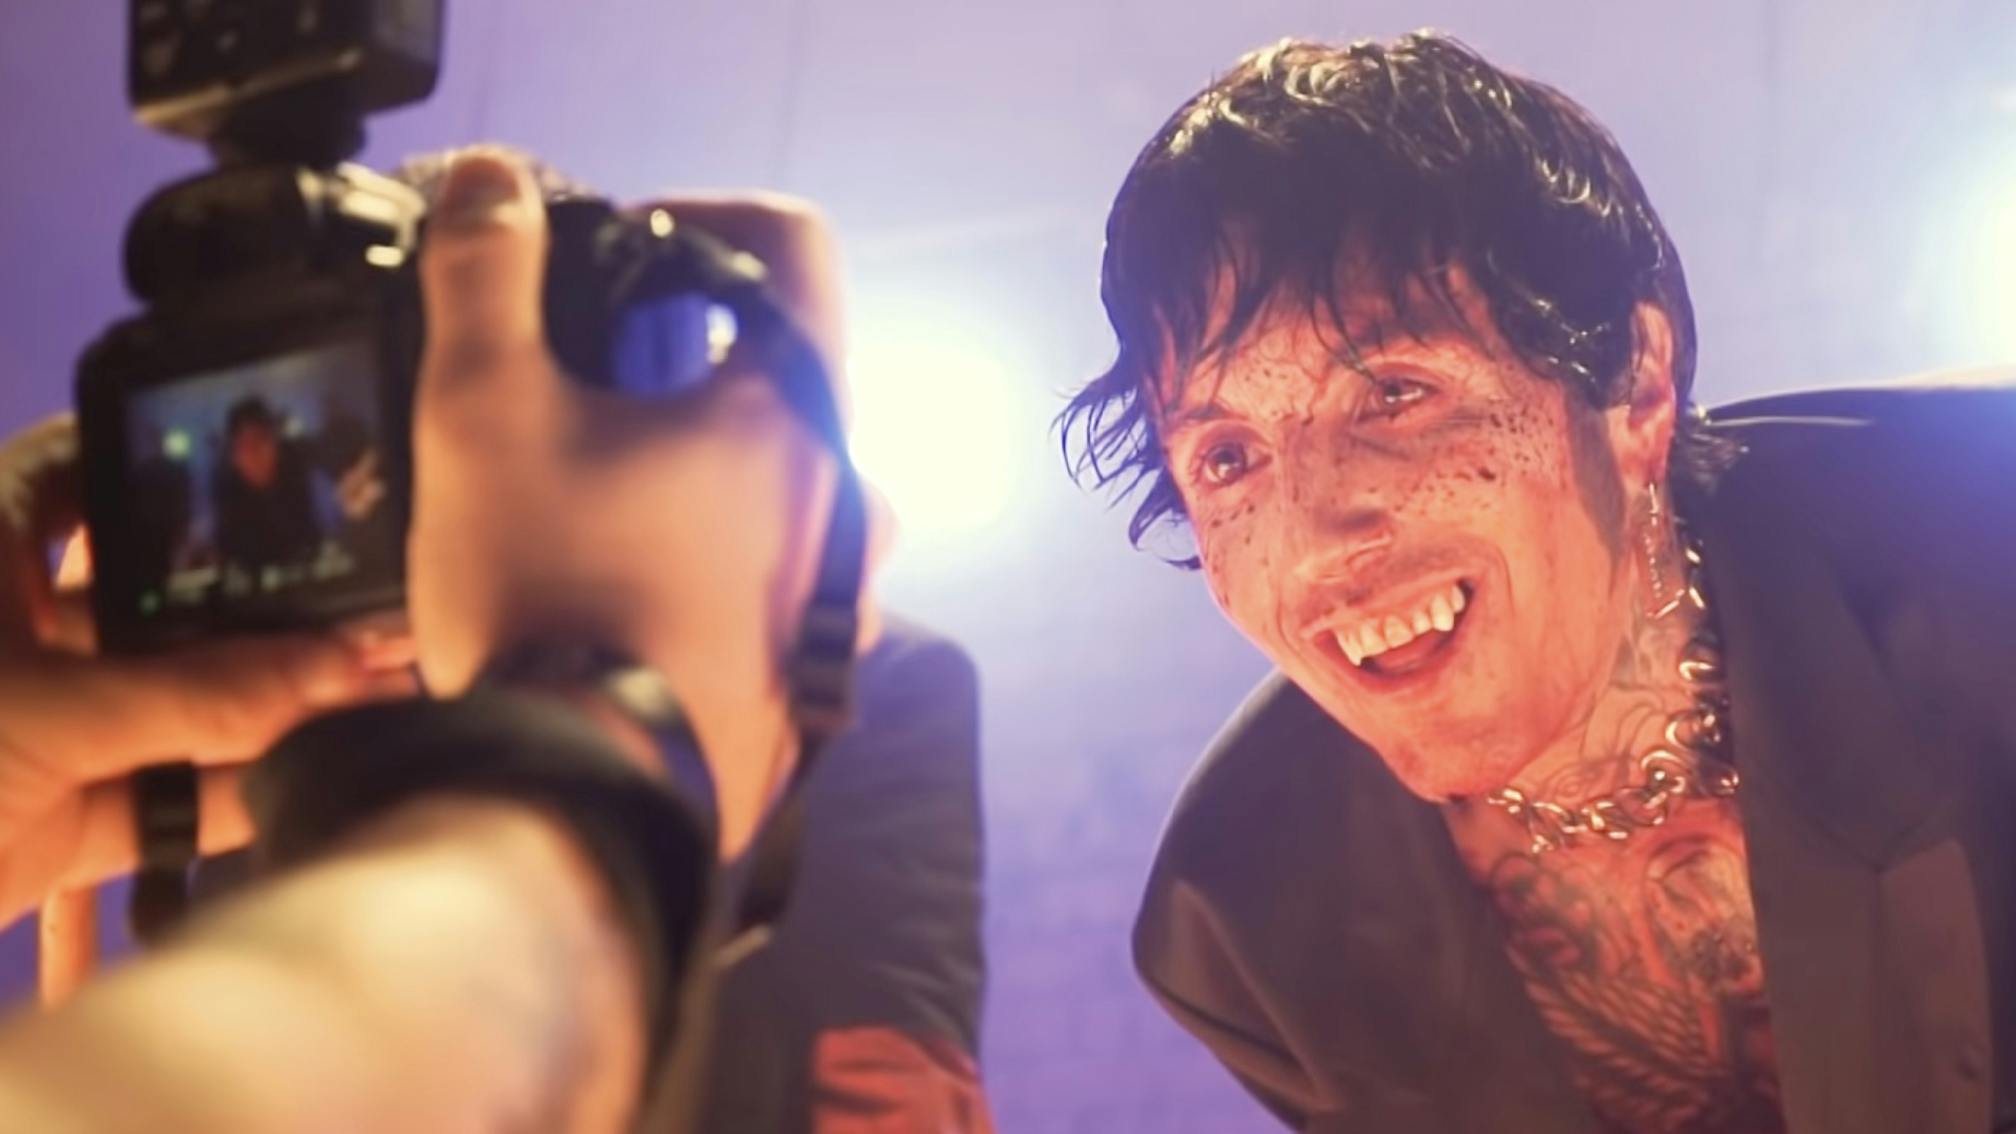 Watch BMTH film DiE4u at a "creepy as hell" abandoned summer camp in Ukraine